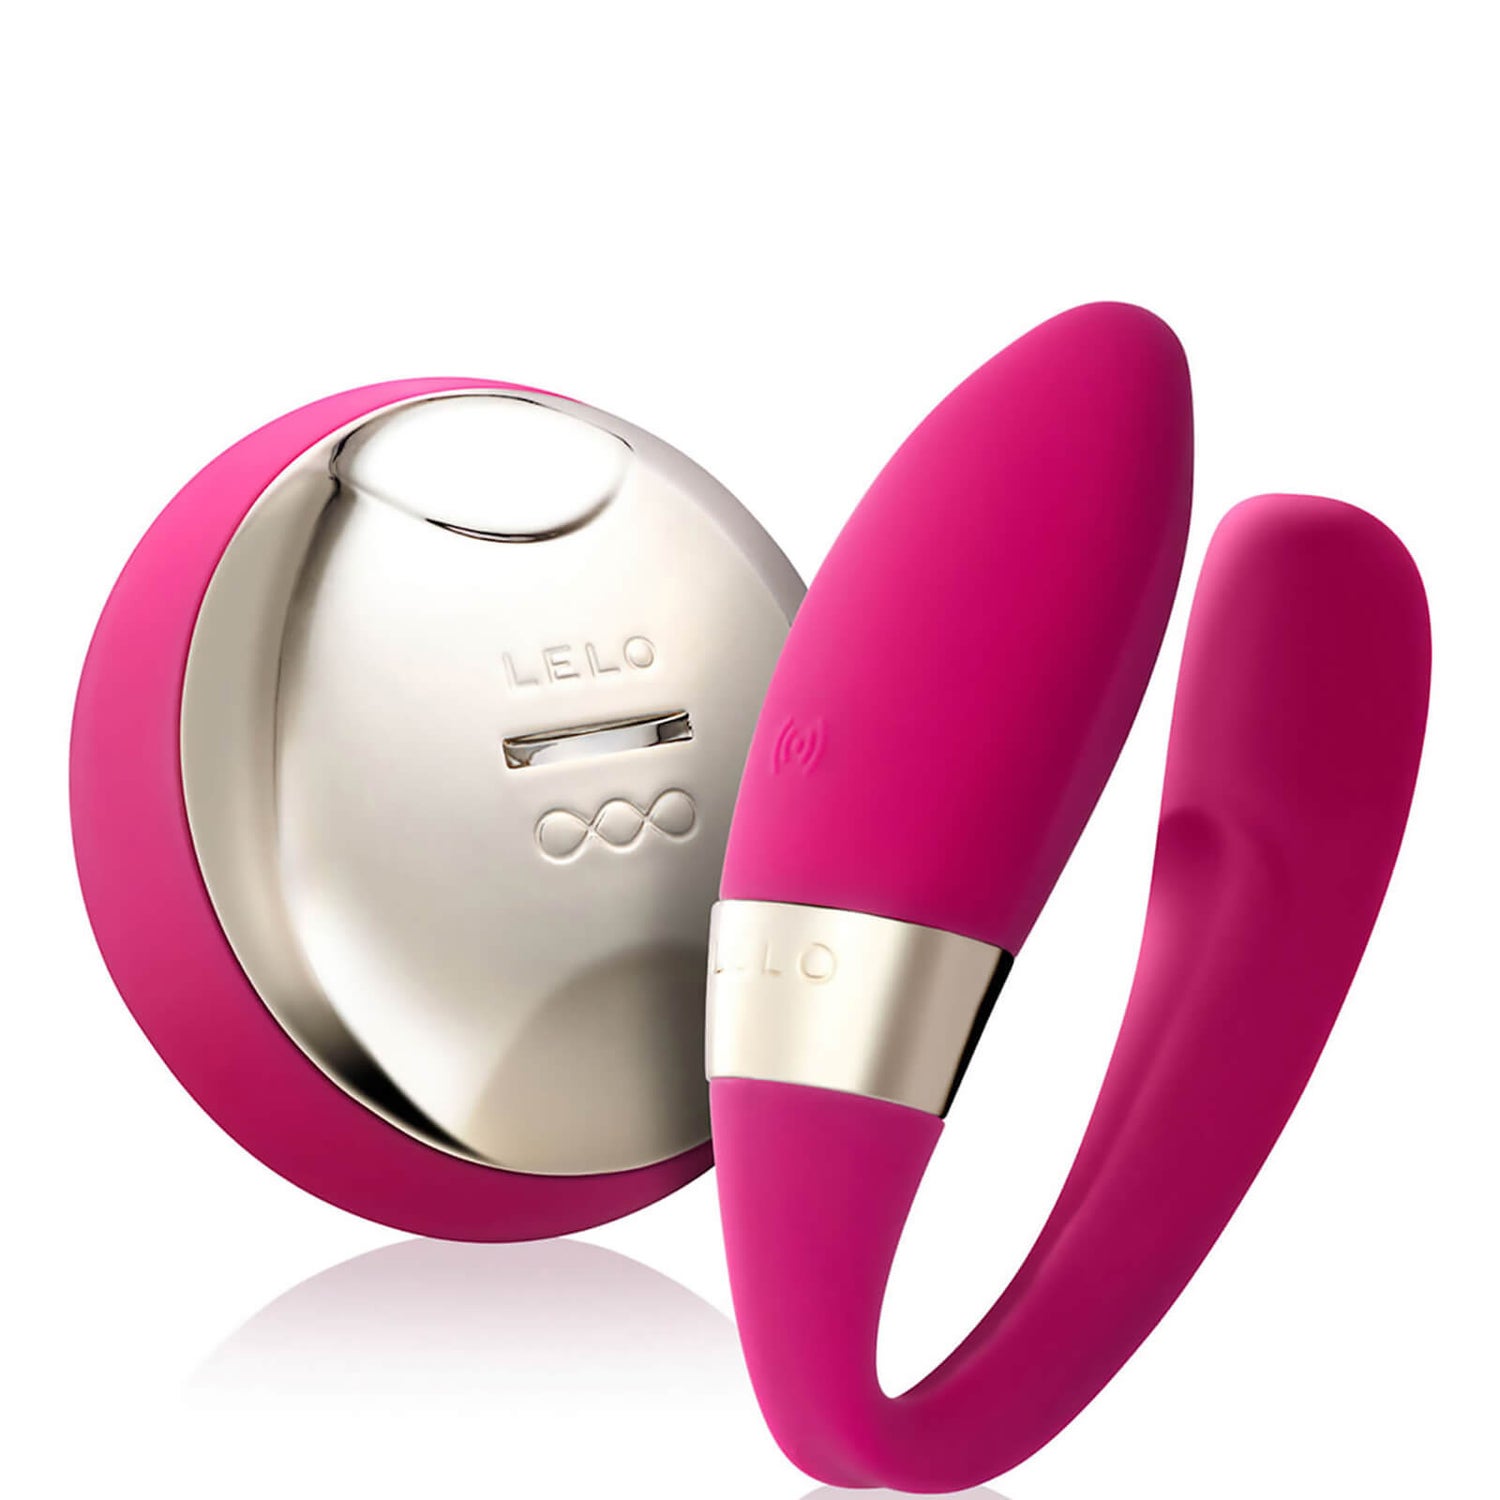 LELO Tiani 2 Remote Control Couples Massage (Various Shades)